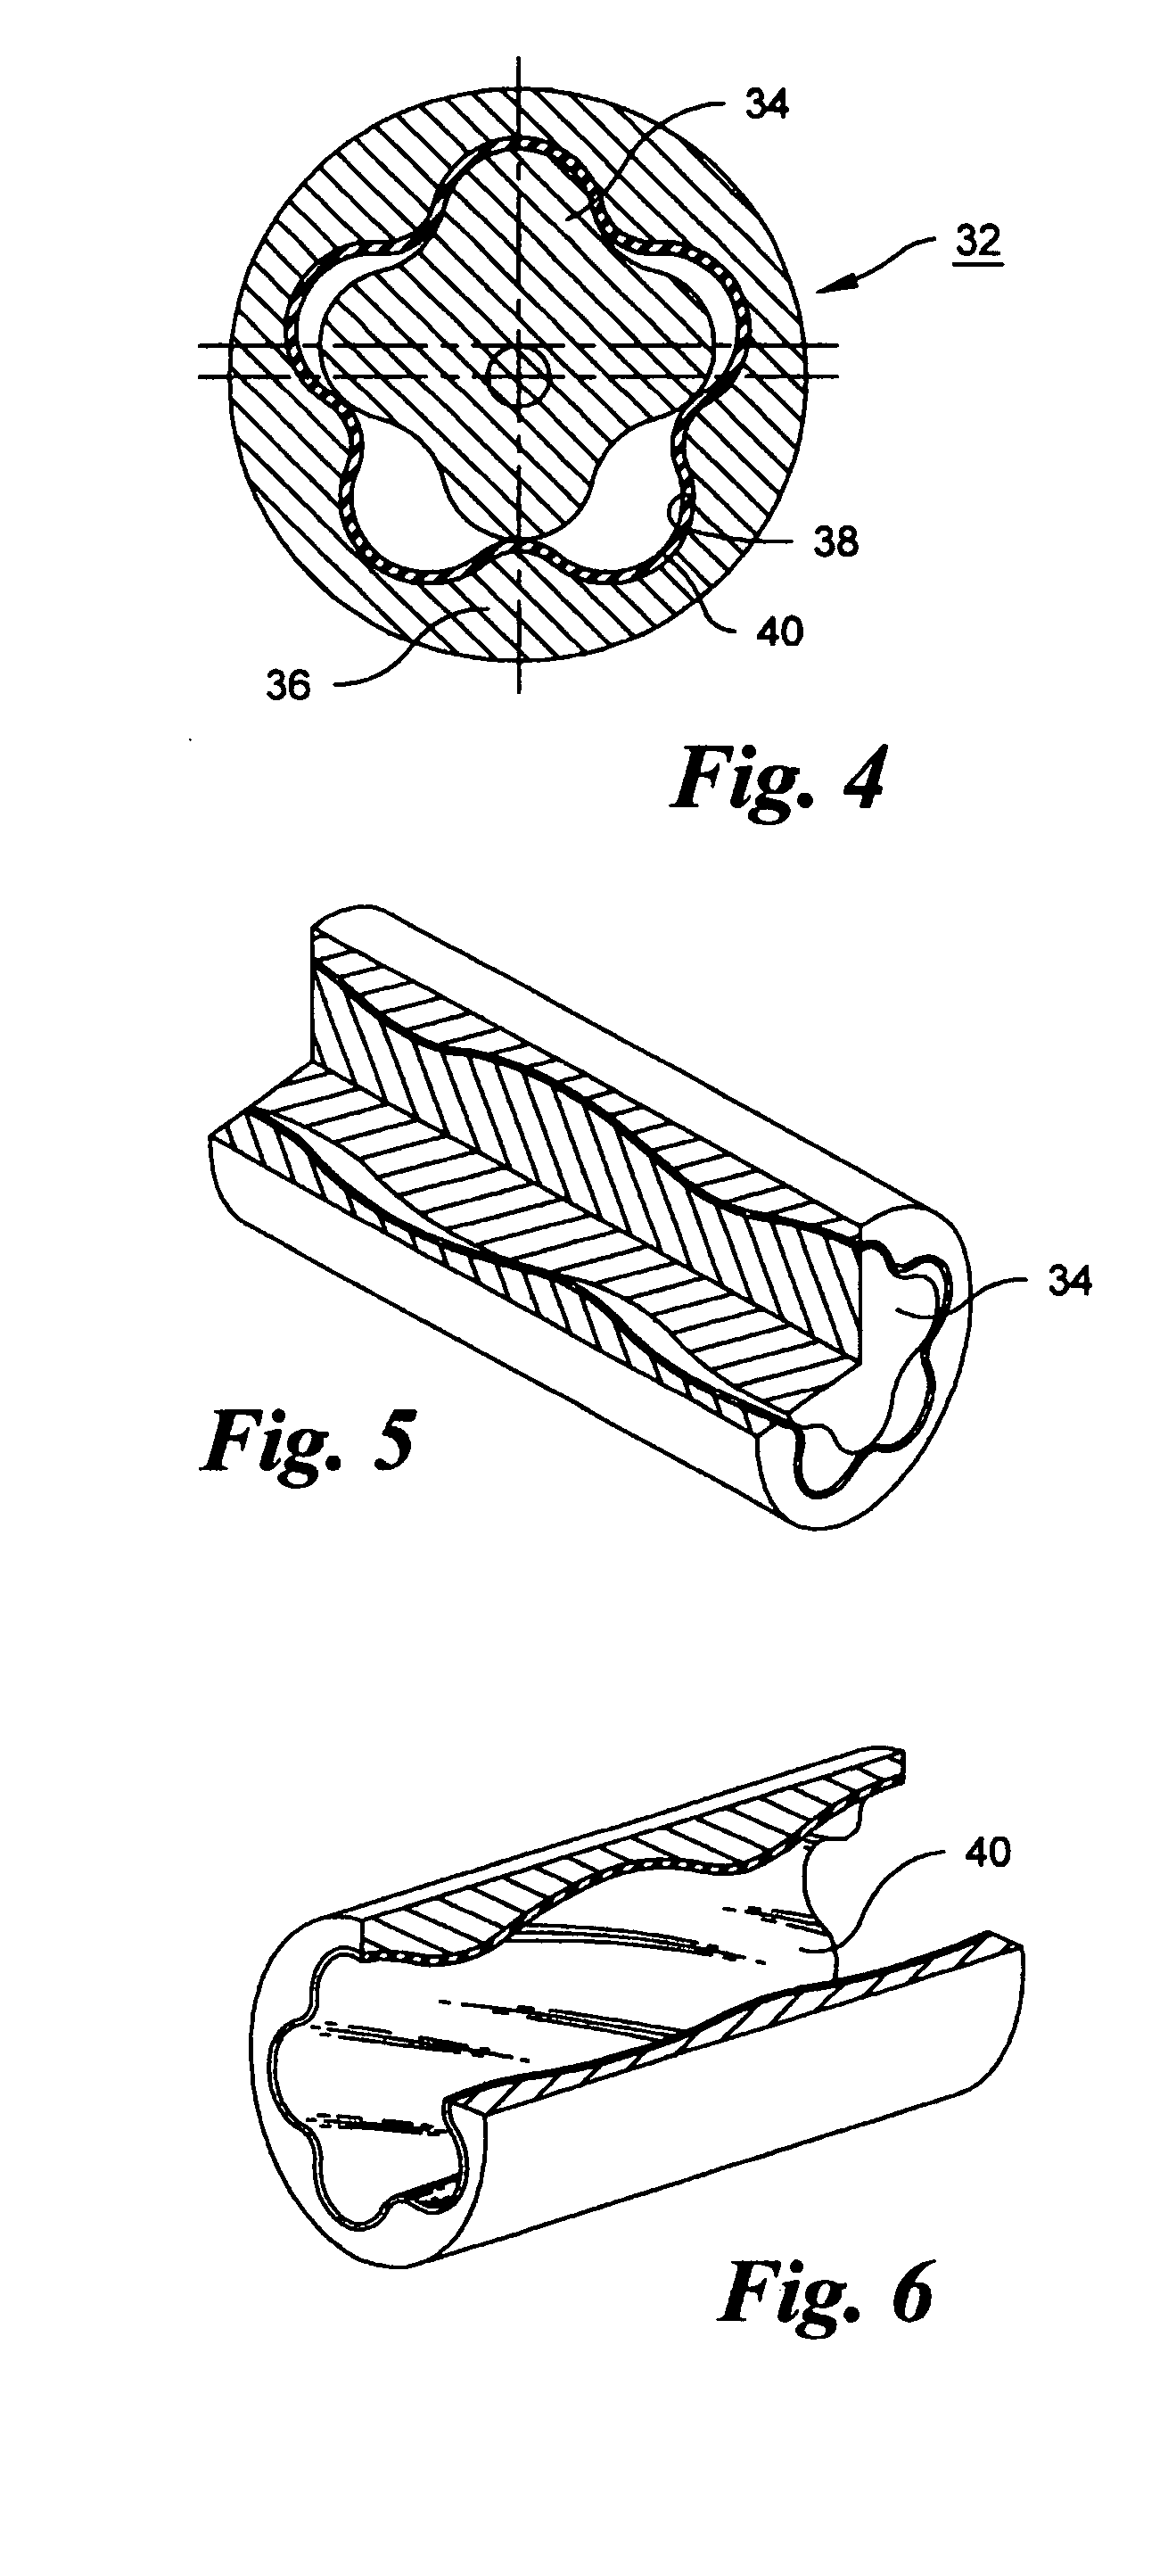 Progressive cavity pump/motor stator, and apparatus and method to manufacture same by electrochemical machining